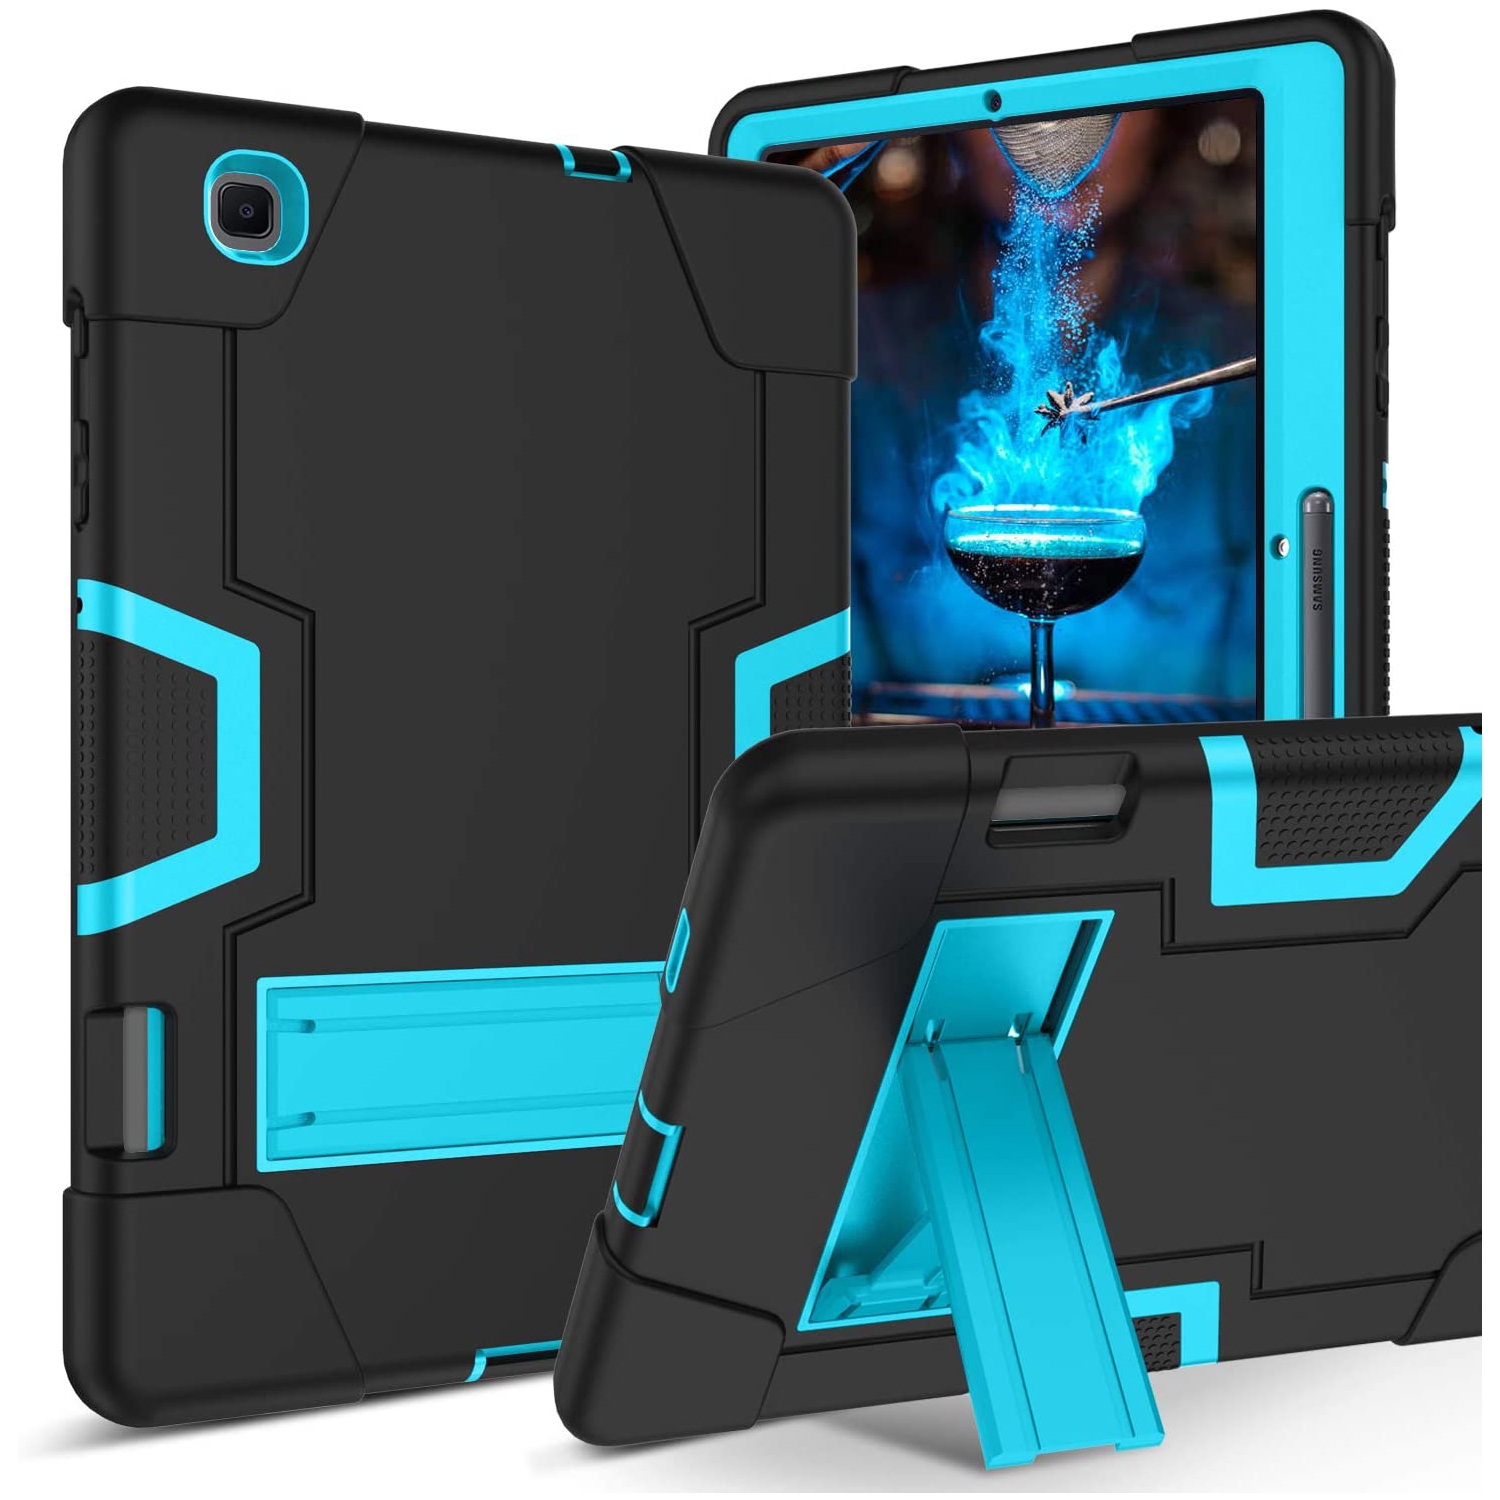 Galaxy Tab S6 Lite Case Y Samsung Tab S6 Lite Cases with Pencil Holder 3 in 1 Rubber Shockproof Heavy Duty Full Body Protective Hybrid Bumper Kickstand Tablet Covers for Samsung Ga